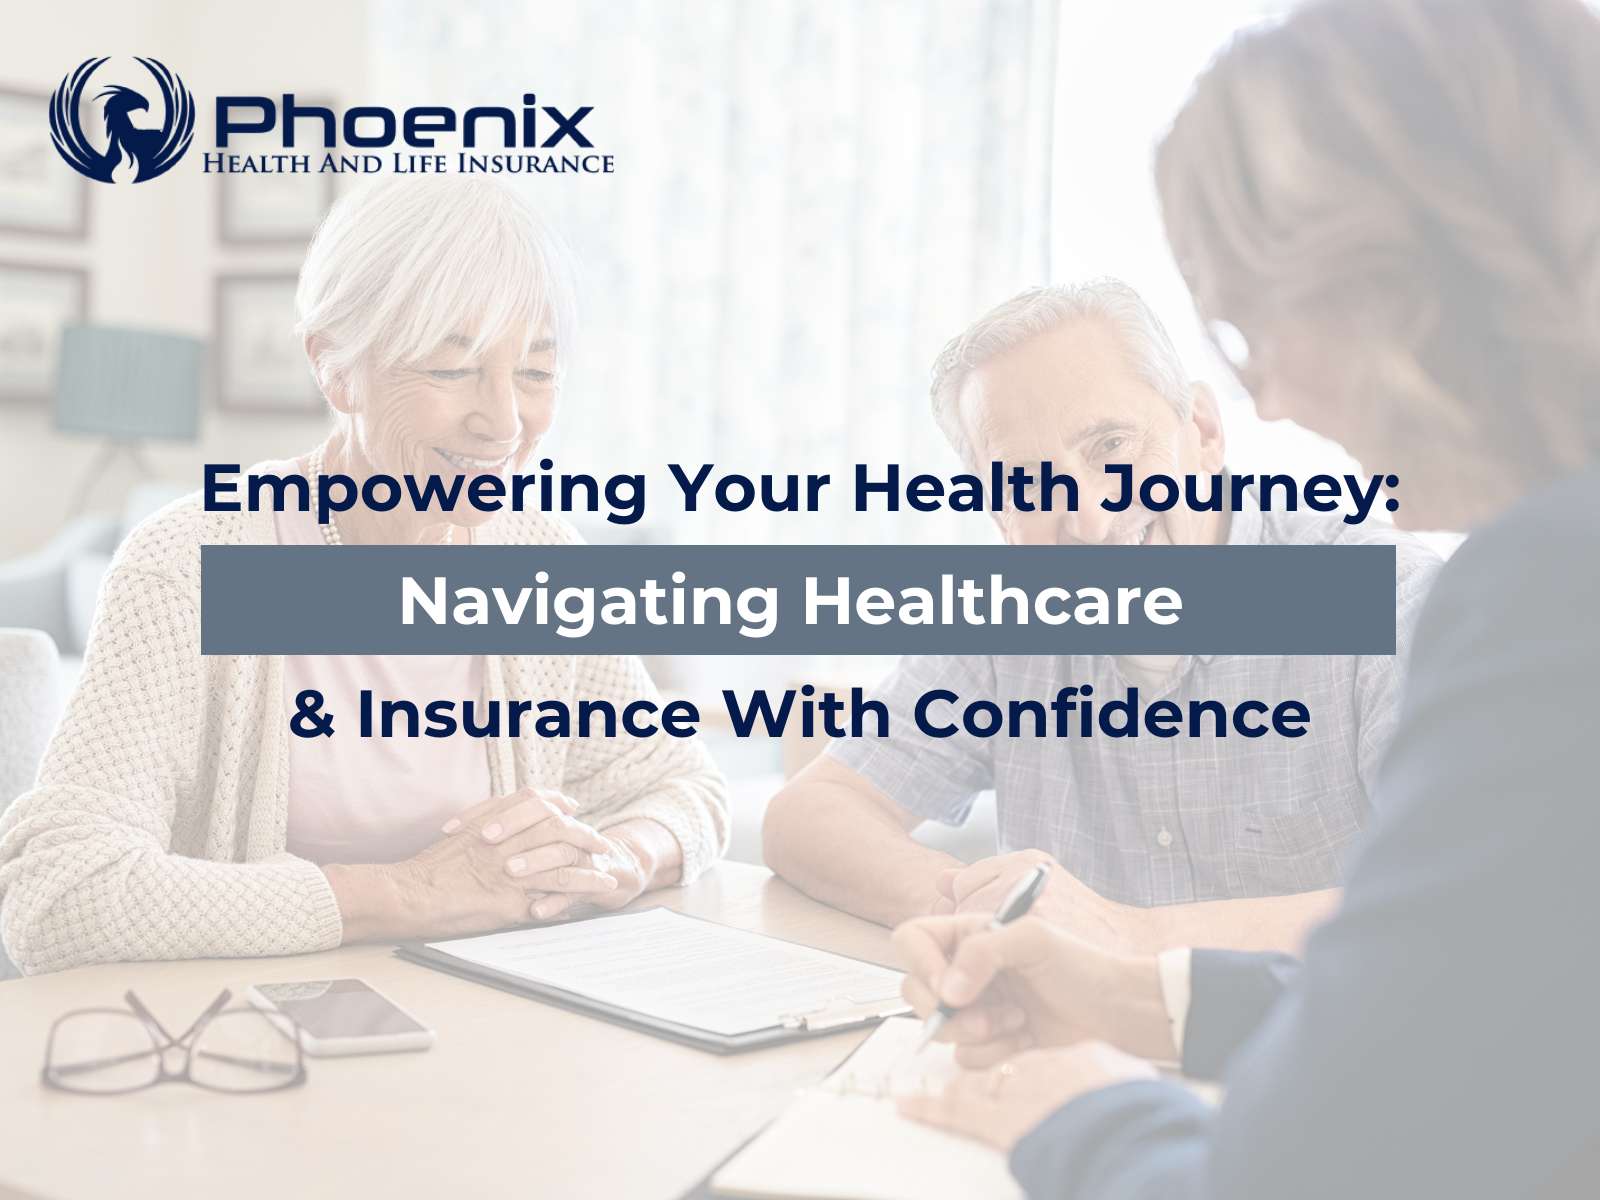 Empowering Your Health Journey: Navigating Healthcare & Insurance With Confidence